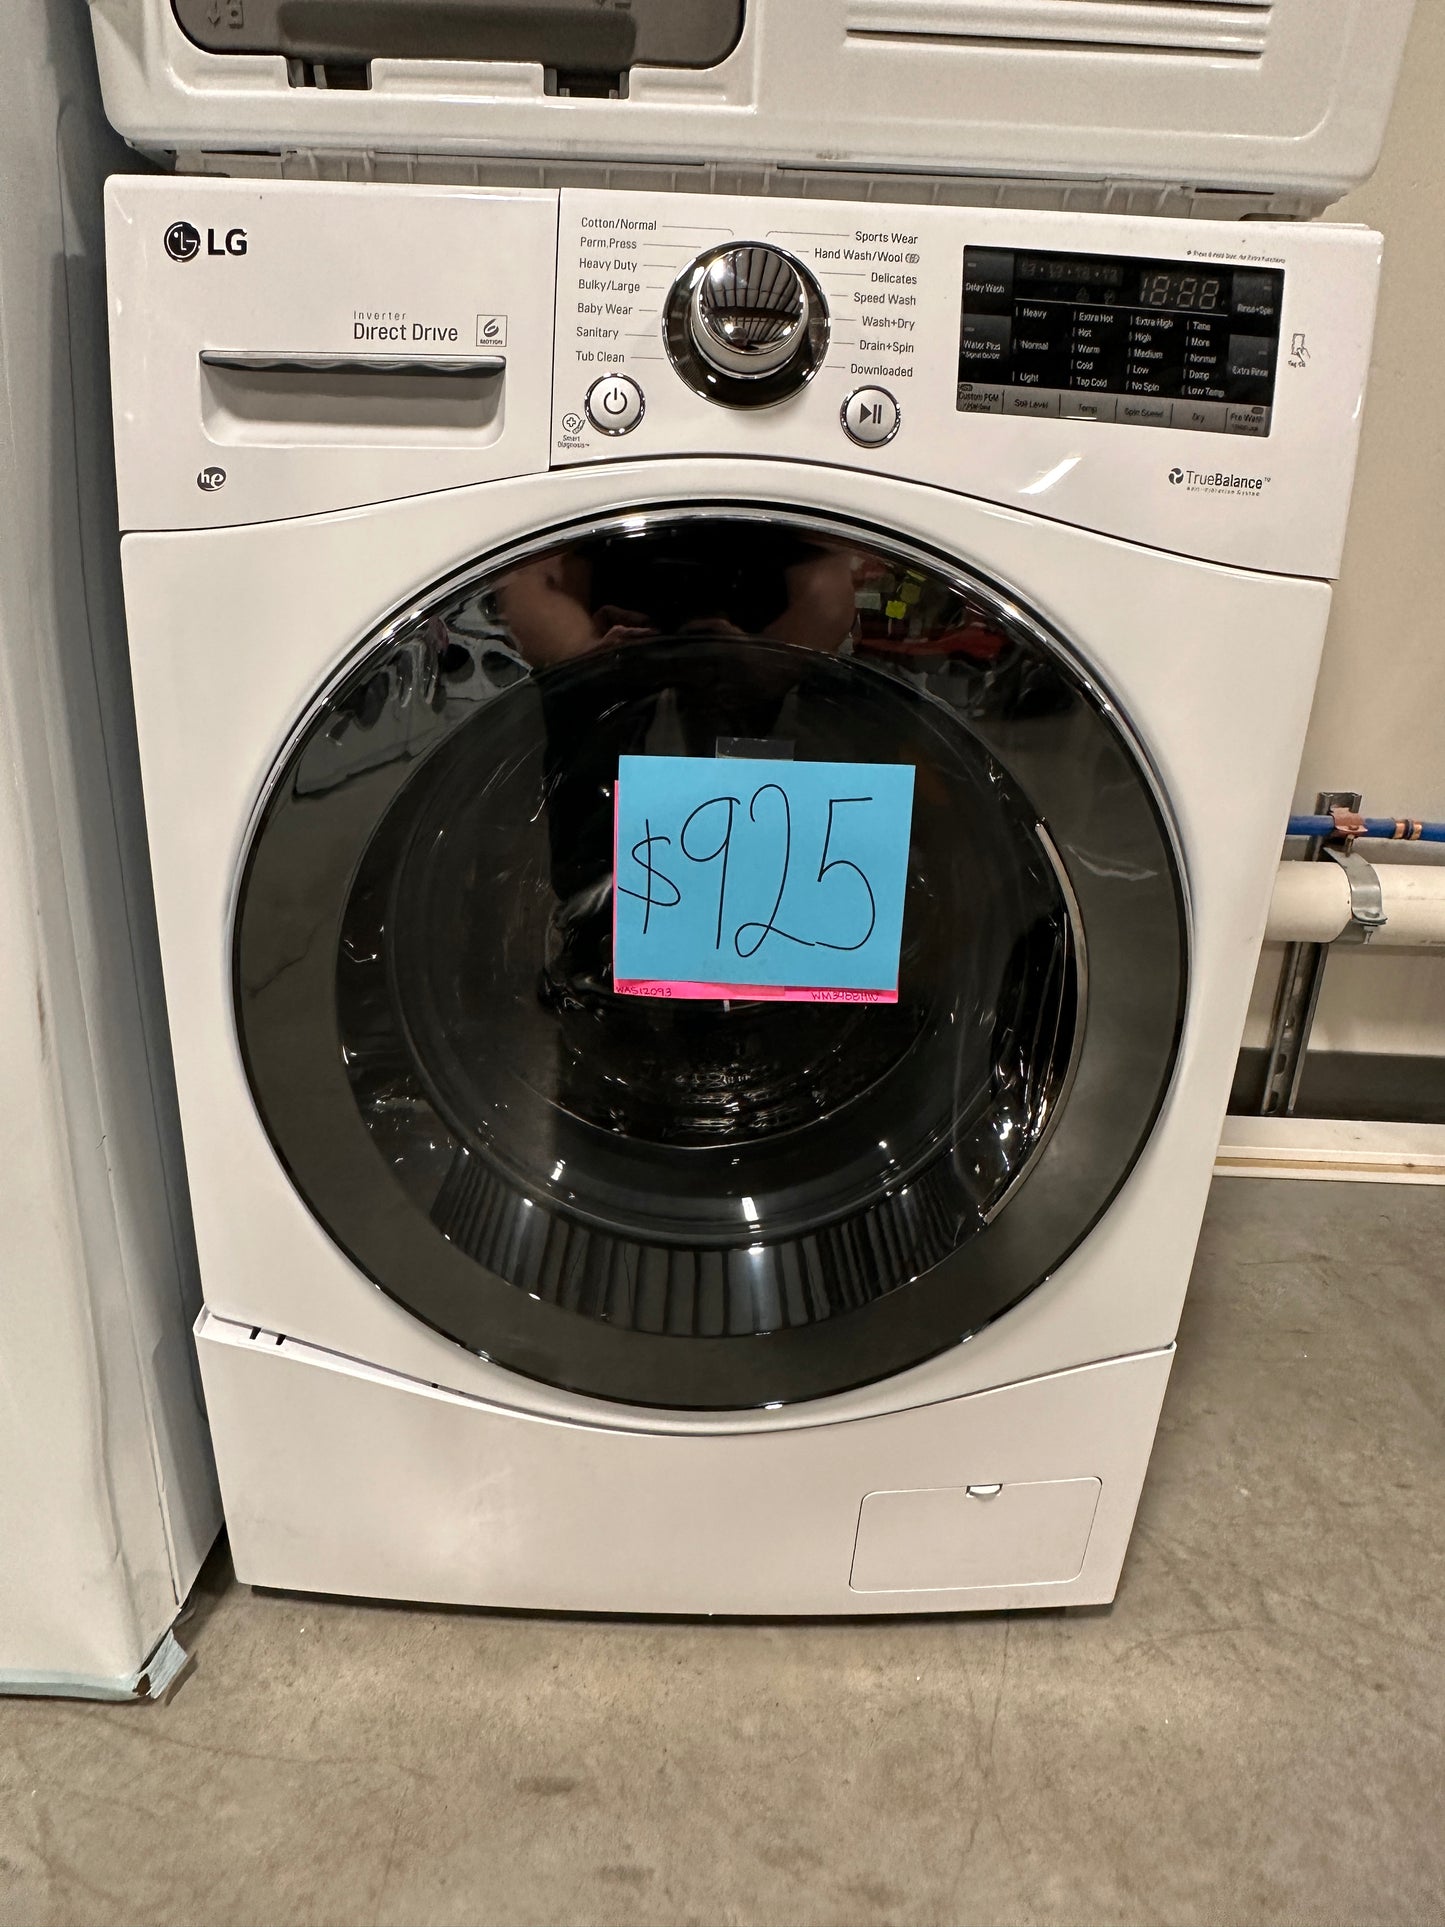 NEW COMPACT WASHER/DRYER COMBO - GREAT FOR APARTMENT OR RV - WAS12093